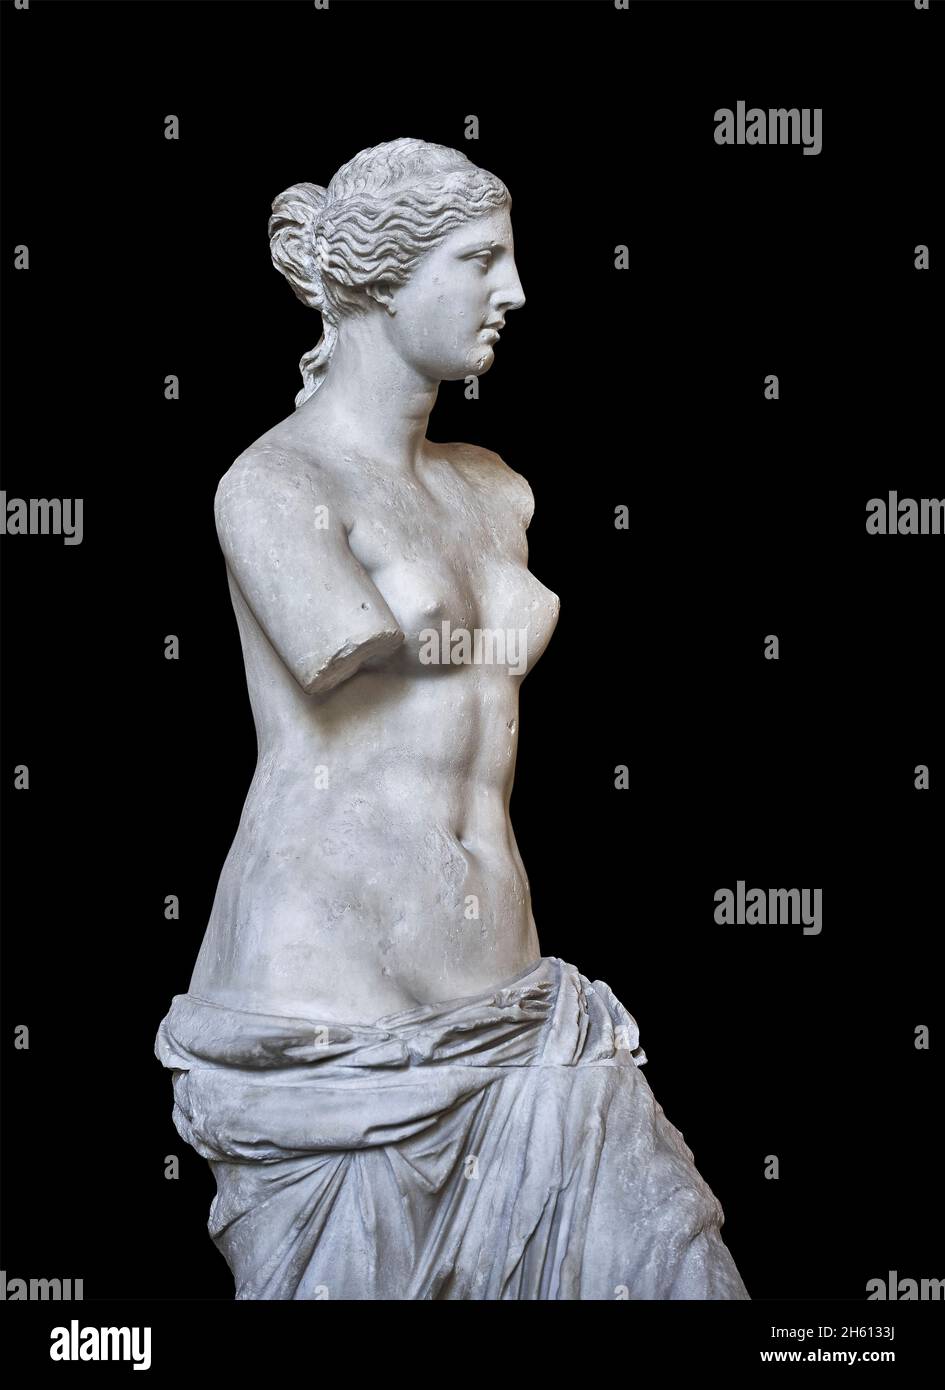 Venus de Milo ancinet Greek statue of Aphrodite, circa 150 and 125 BC, Louvre Museum Ma399 or N527. Aphrodite is depicted hair in a bun with a headban Stock Photo